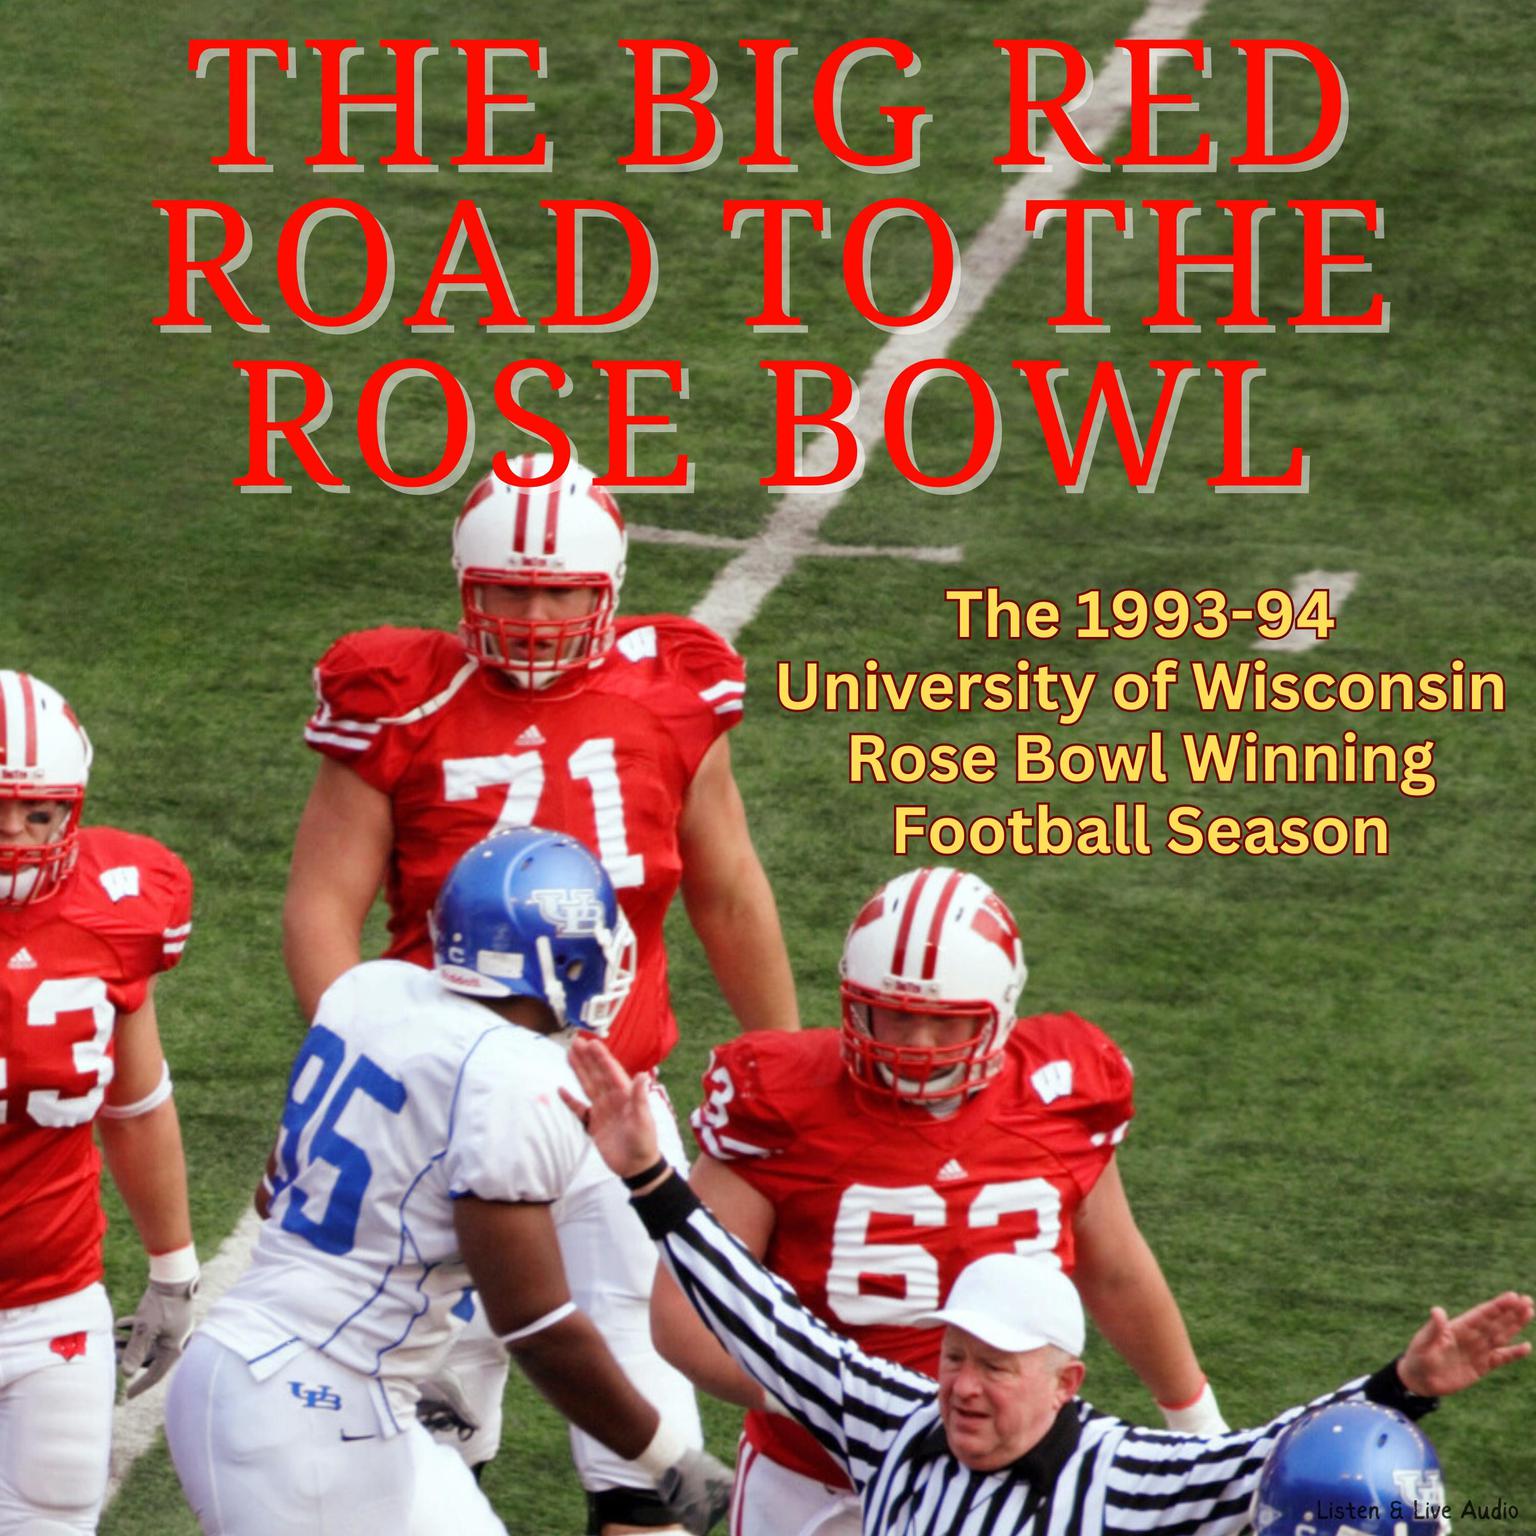 The Big Red Road To The Rose Bowl: The 1993-94 University of Wisconsin Rose Bowl Winning Football Season: The 1993–94 University of Wisconsin Rose Bowl Winning Football Season Audiobook, by various authors